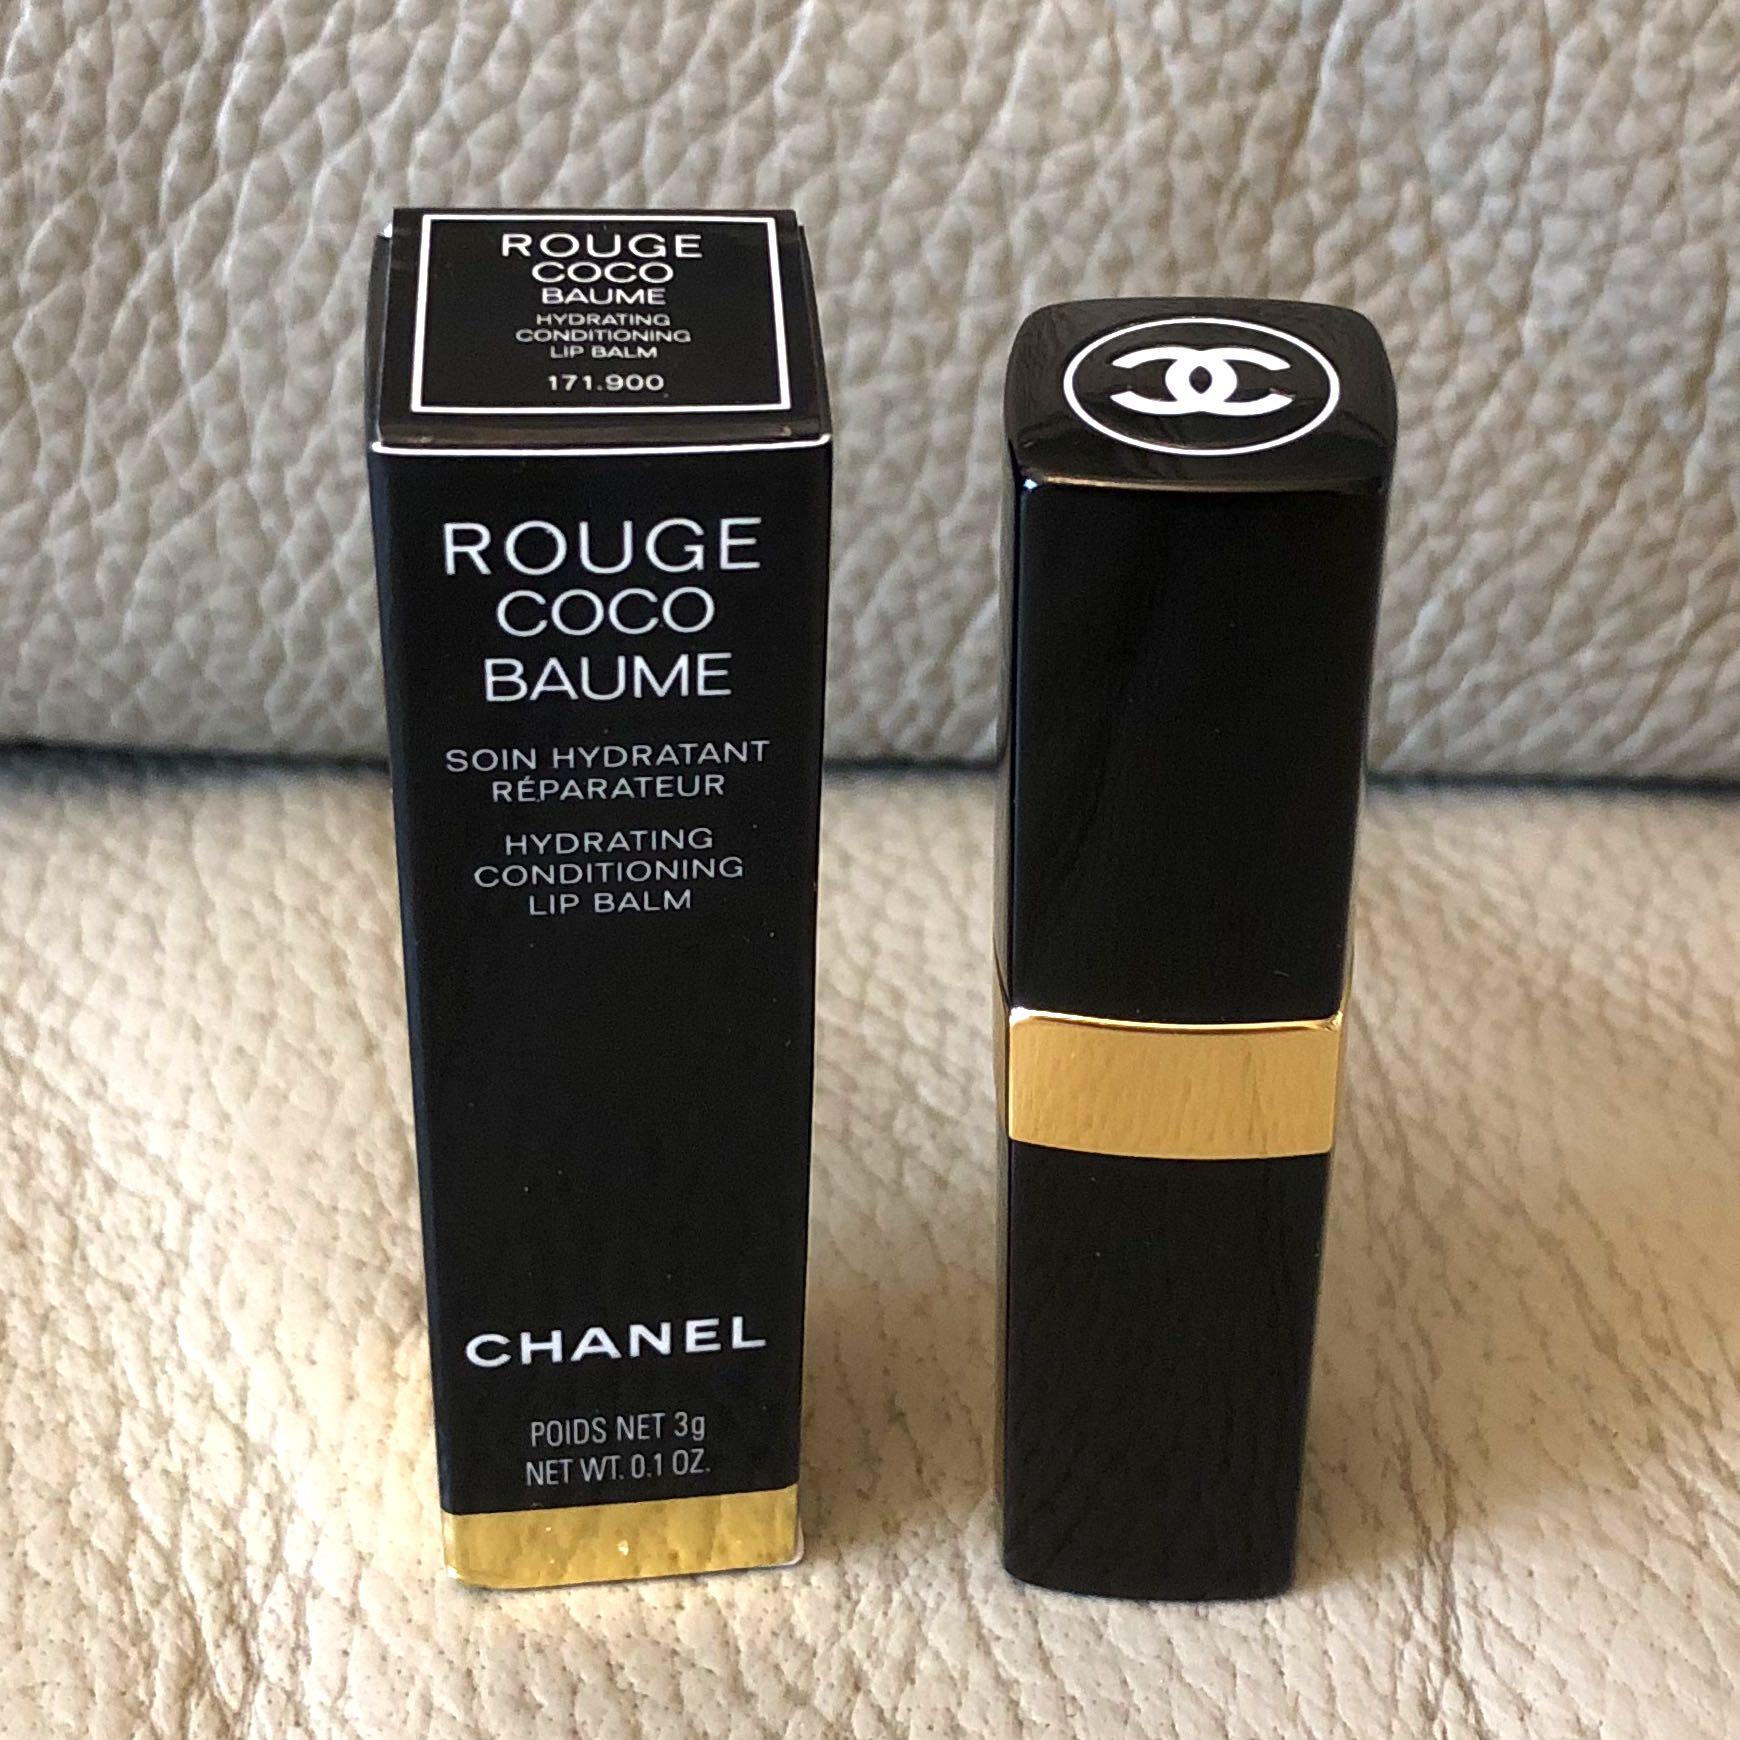 Cheap BNIB Chanel Rouge Coco Baume Hydrating Conditioning Lip Balm / Chanel  Lip Balm / Chanel Lip Care, Beauty & Personal Care, Face, Makeup on  Carousell